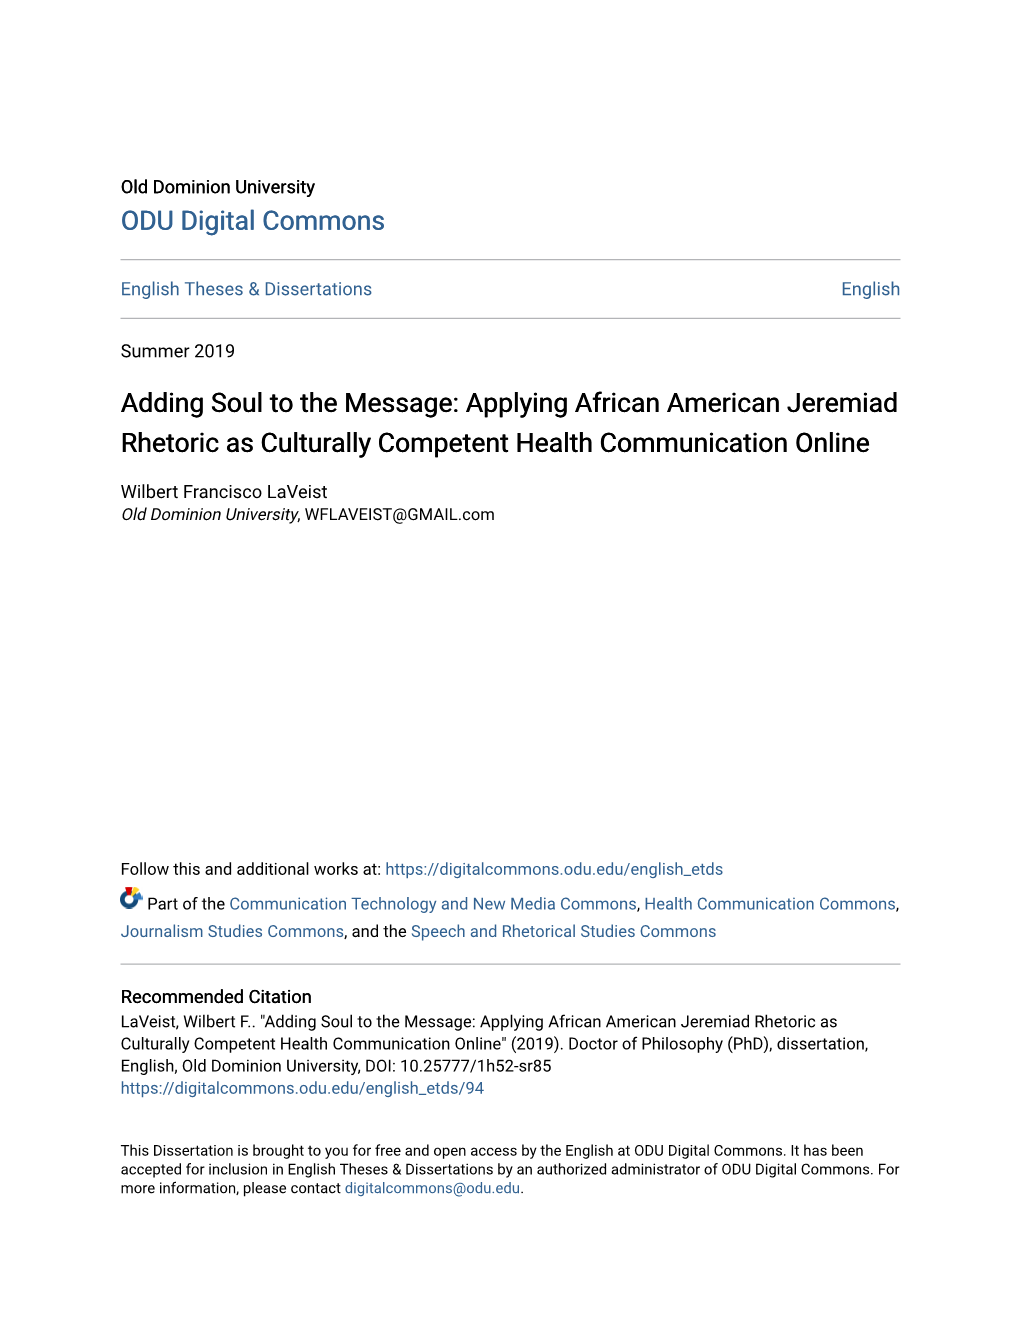 Applying African American Jeremiad Rhetoric As Culturally Competent Health Communication Online